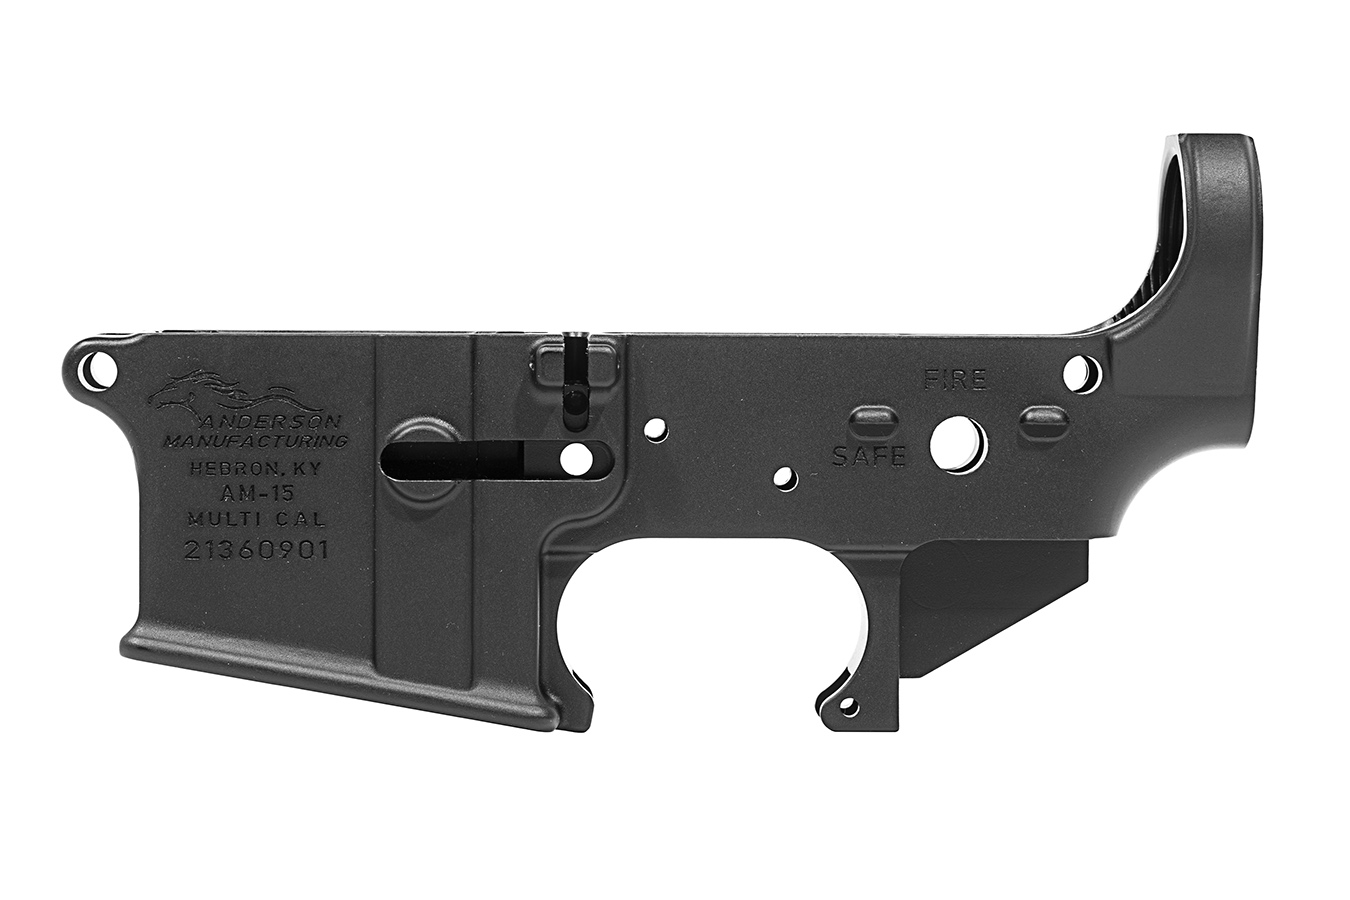 No. 1 Best Selling: ANDERSON MANUFACTURING AM-15 STRIPPED LOWER RECEIVER (MULTI CAL)